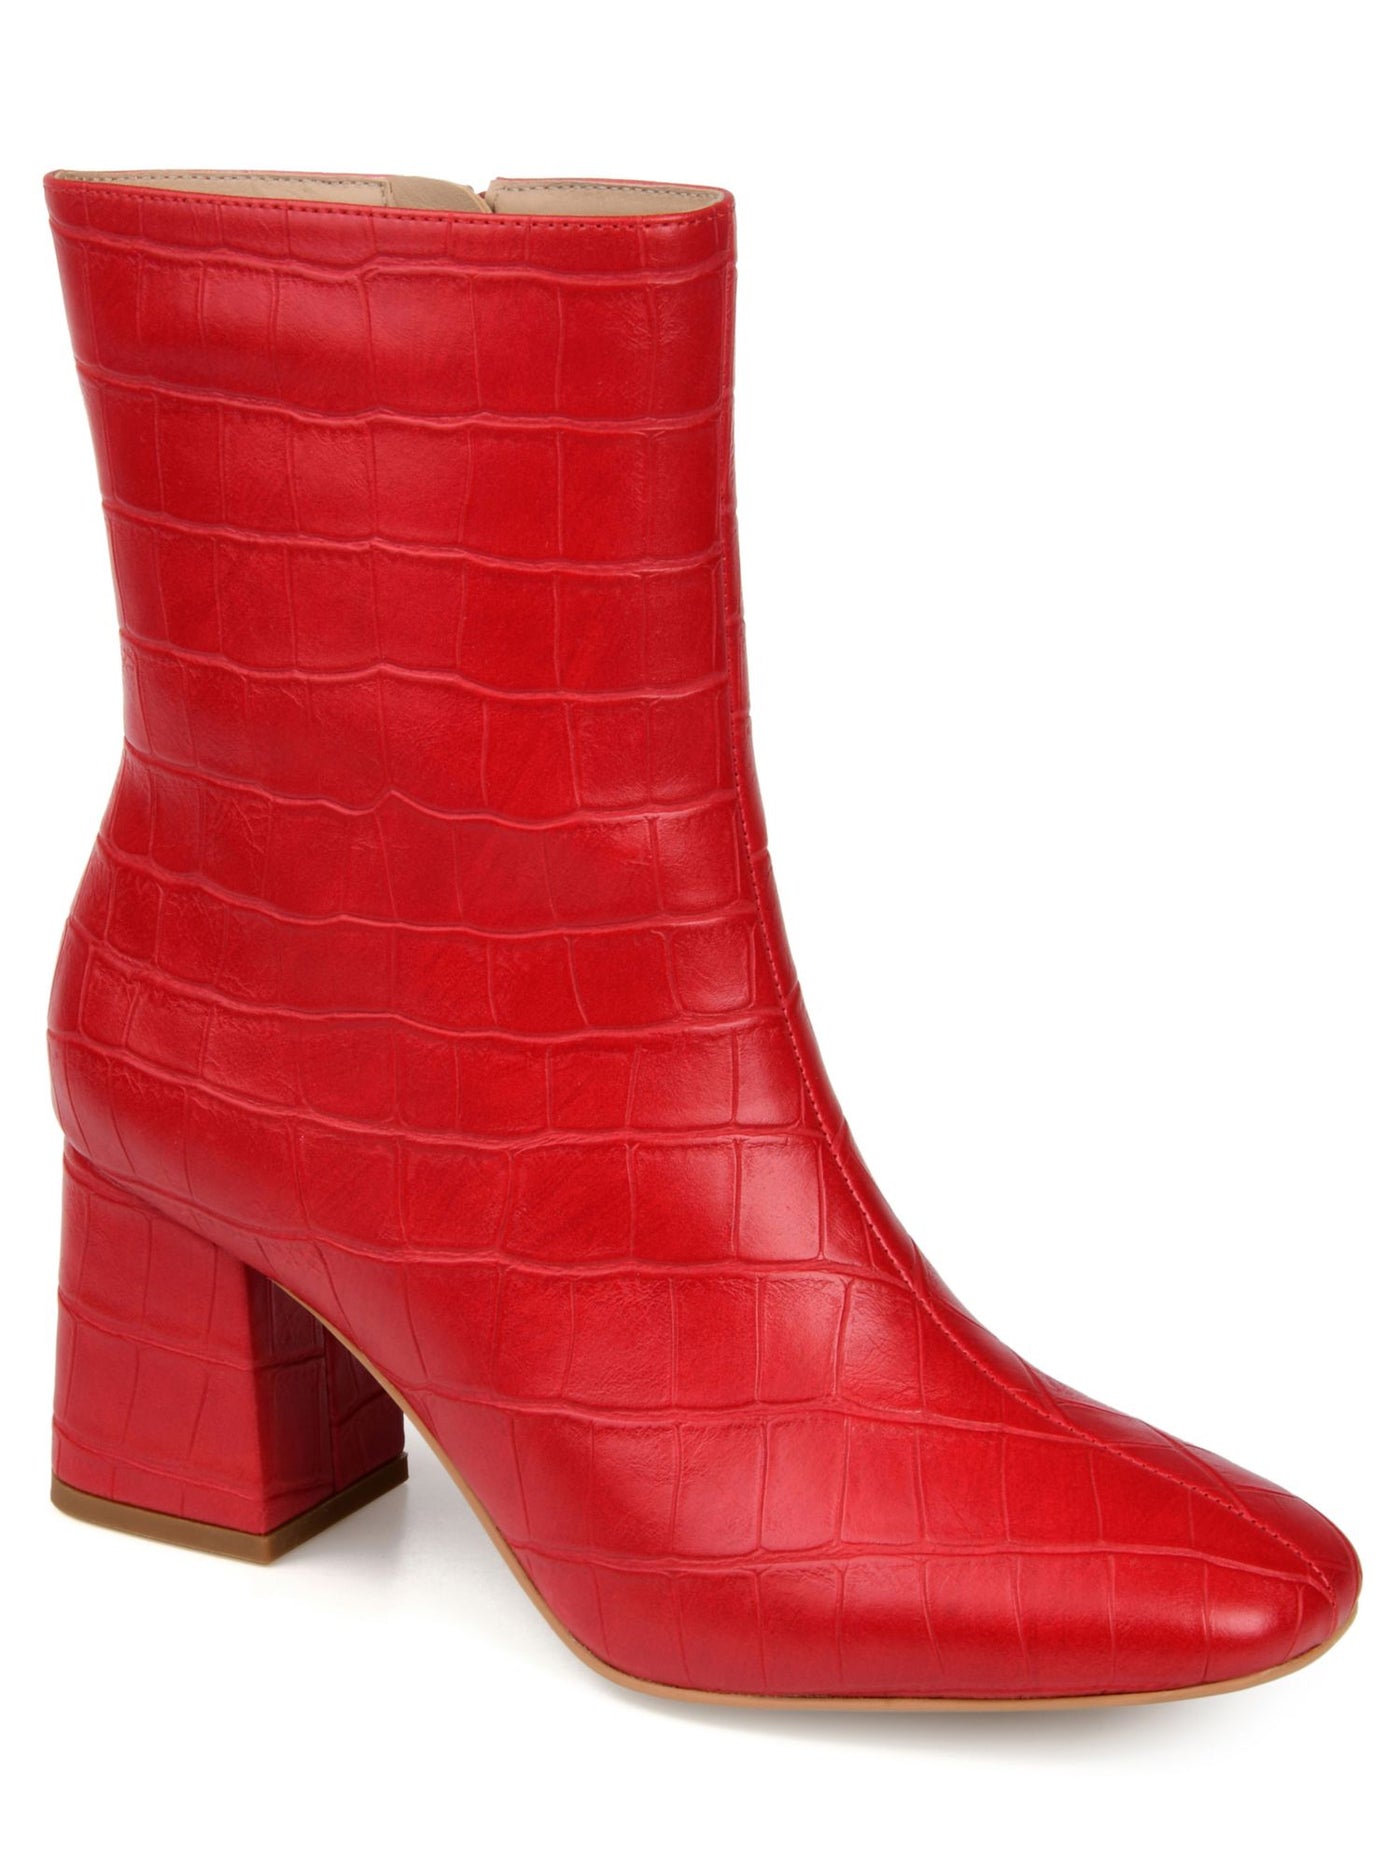 JOURNEE COLLECTION Womens Red Crocodile Padded Trevi Square Toe Block Heel Zip-Up Dress Booties 7.5 M